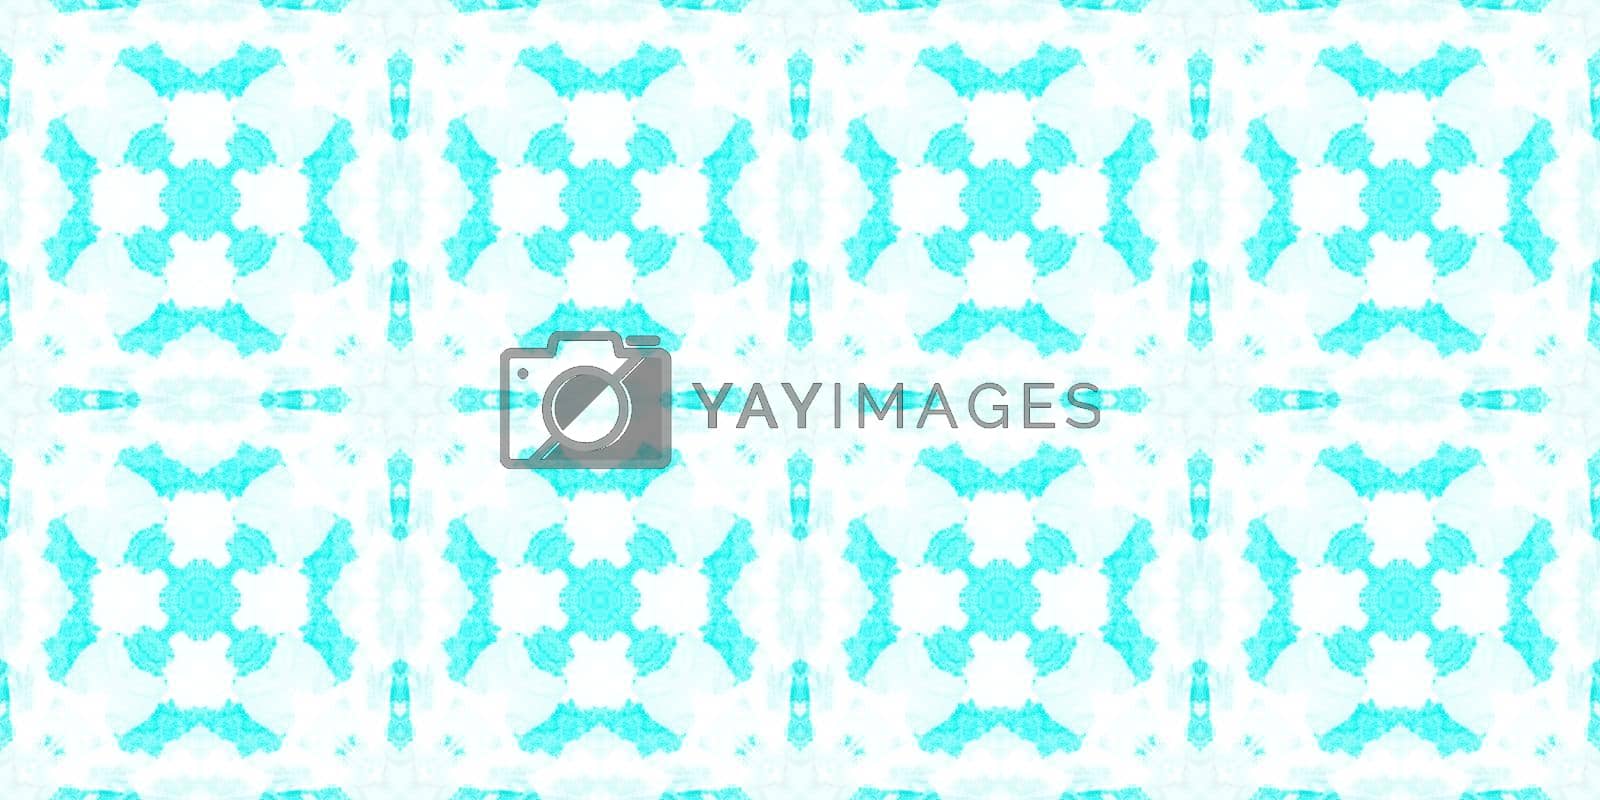 Royalty free image of Abstract Watercolor Tie Dye Background. by YASNARADA